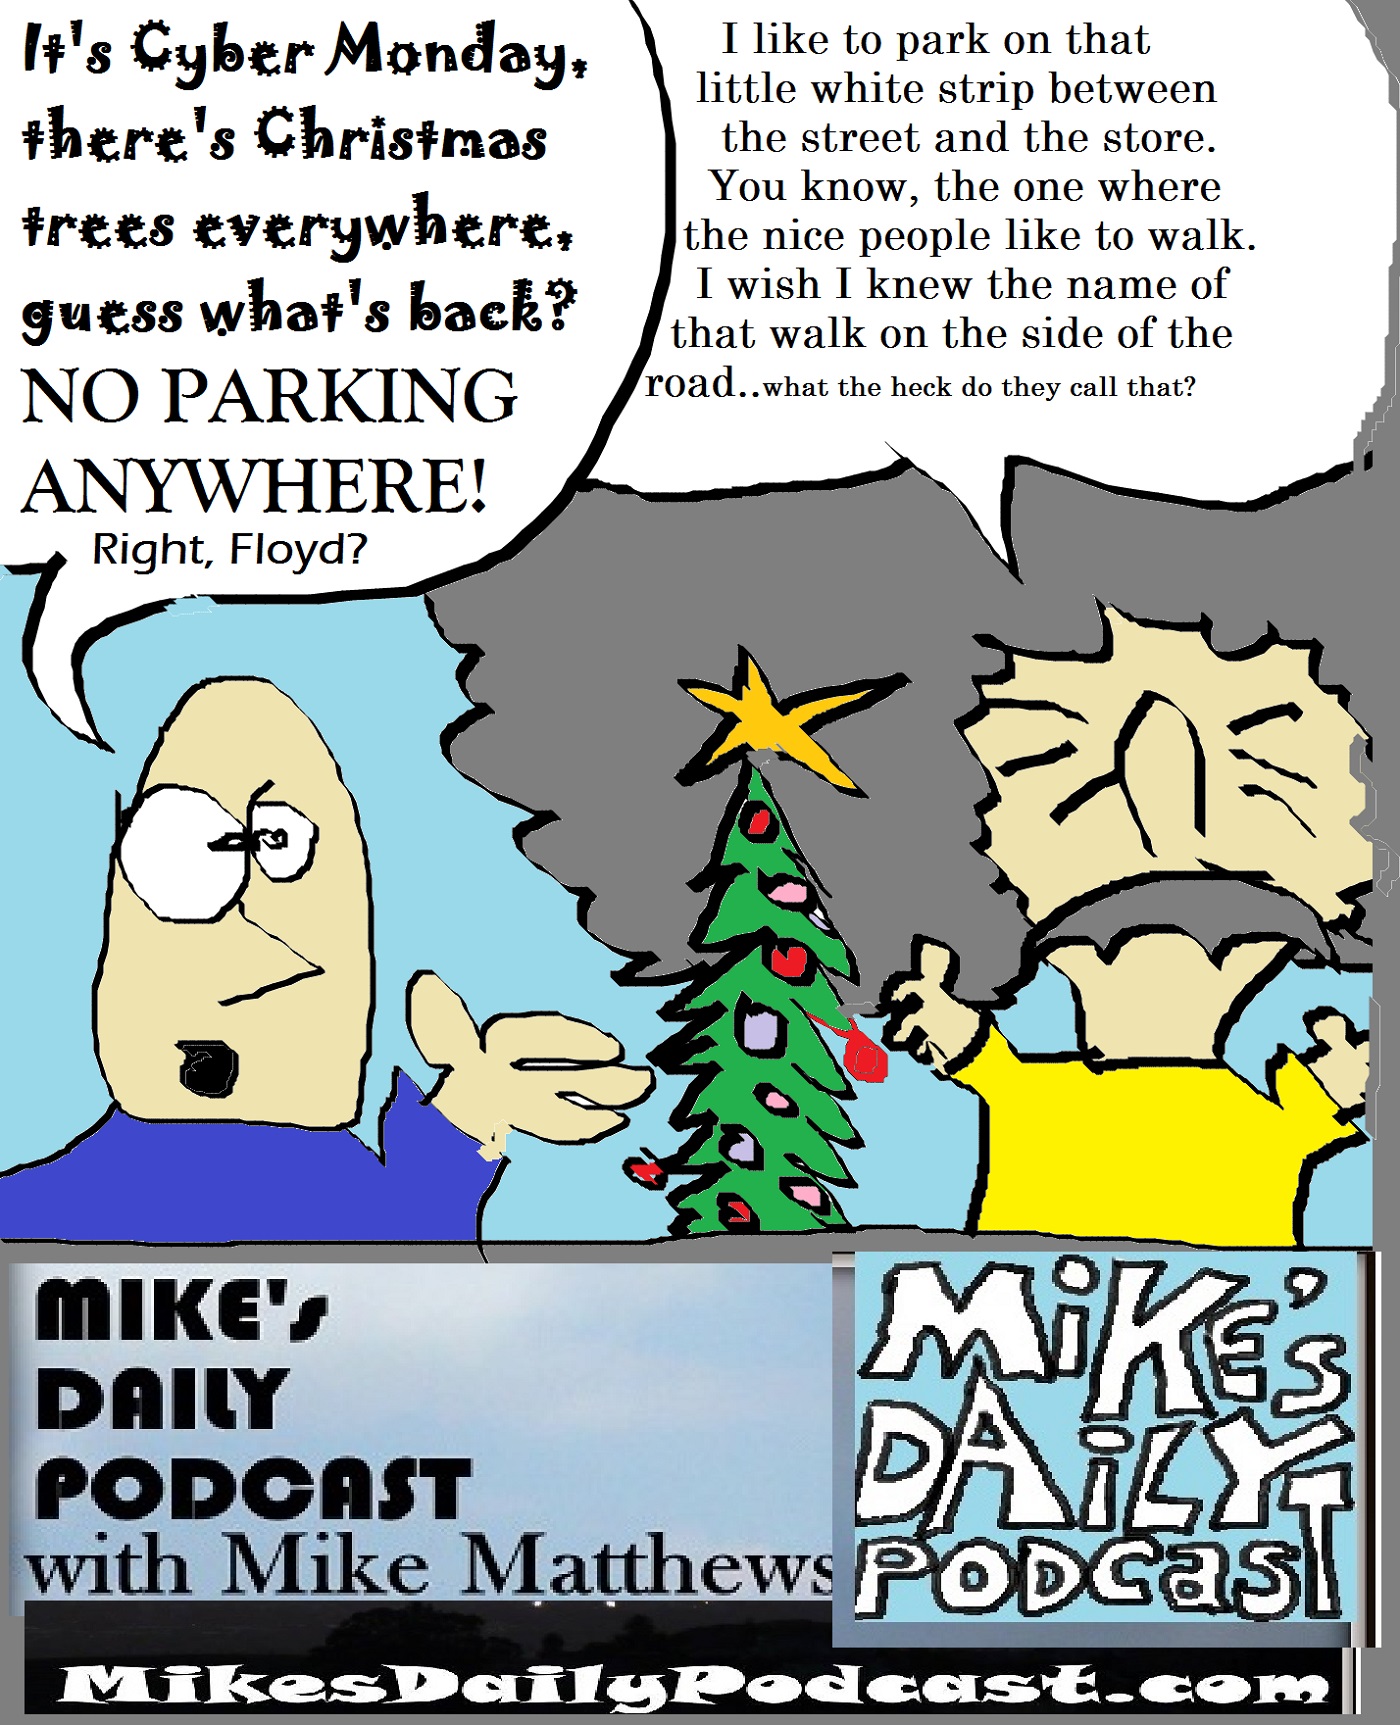 mikes-daily-podcast-1226-christmas-holidays-parking